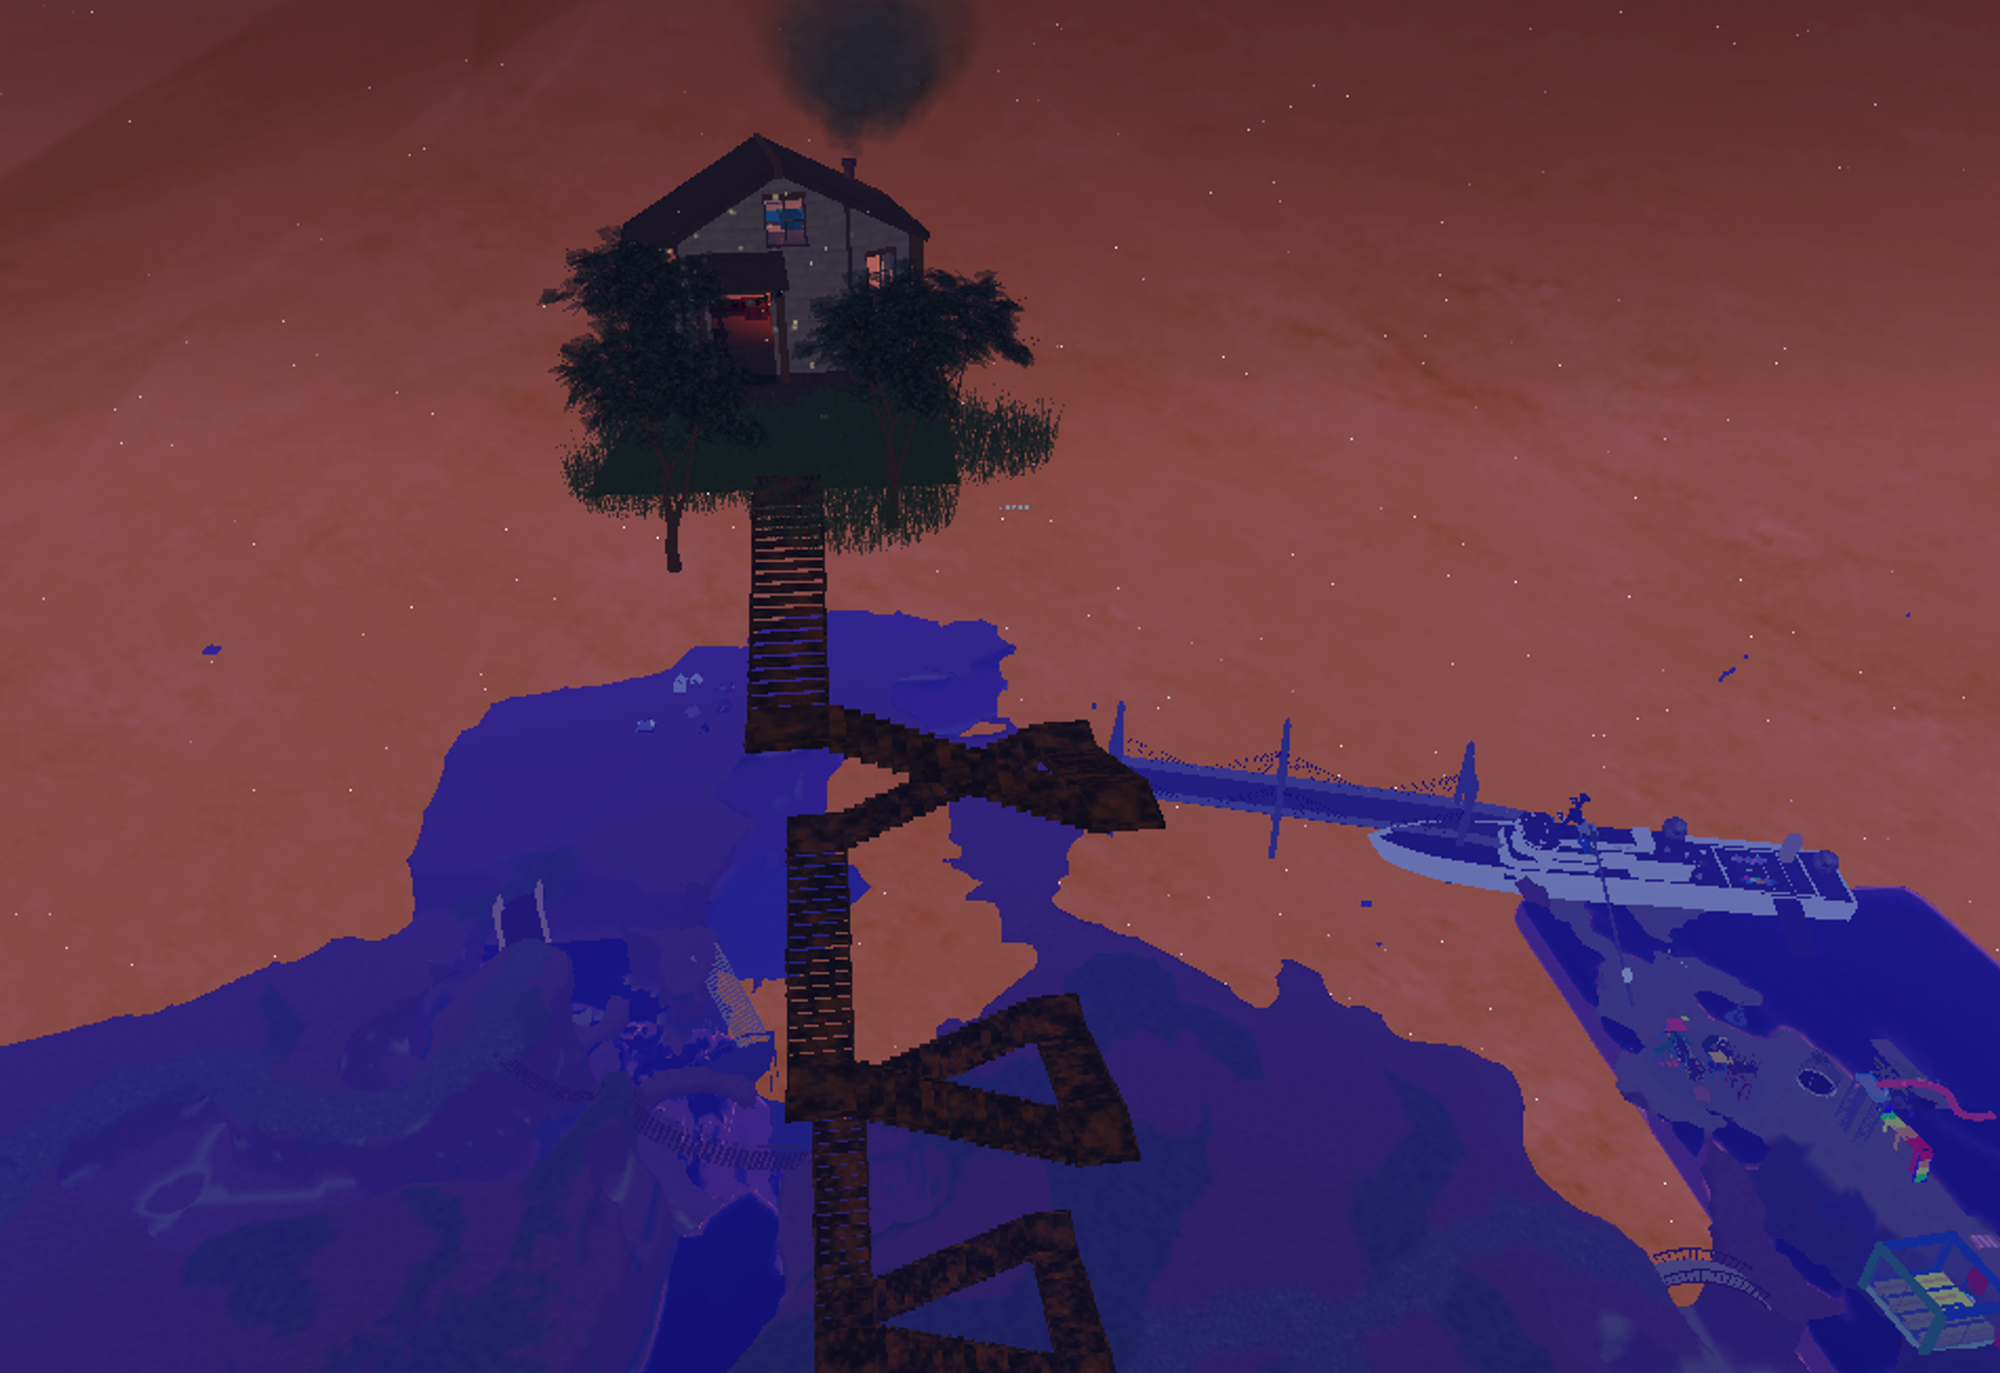 A cabin floating at the top of spiral staircase. You can see a boat and a bridge far below